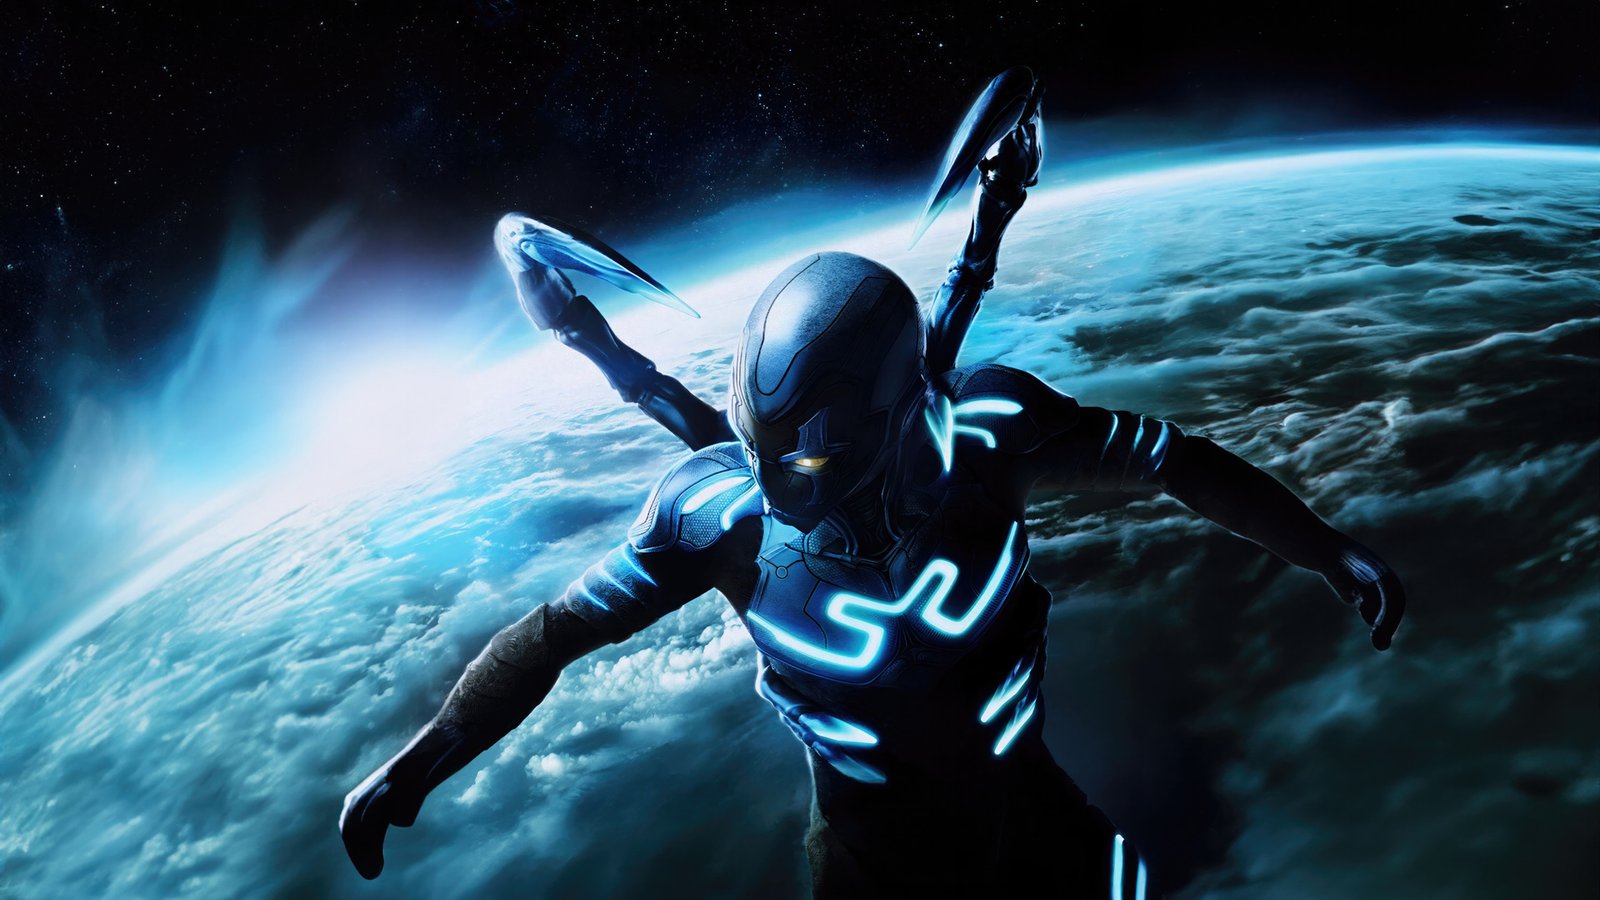 Blue Beetle' Fans Aren't Happy About This Major Change in the Movie